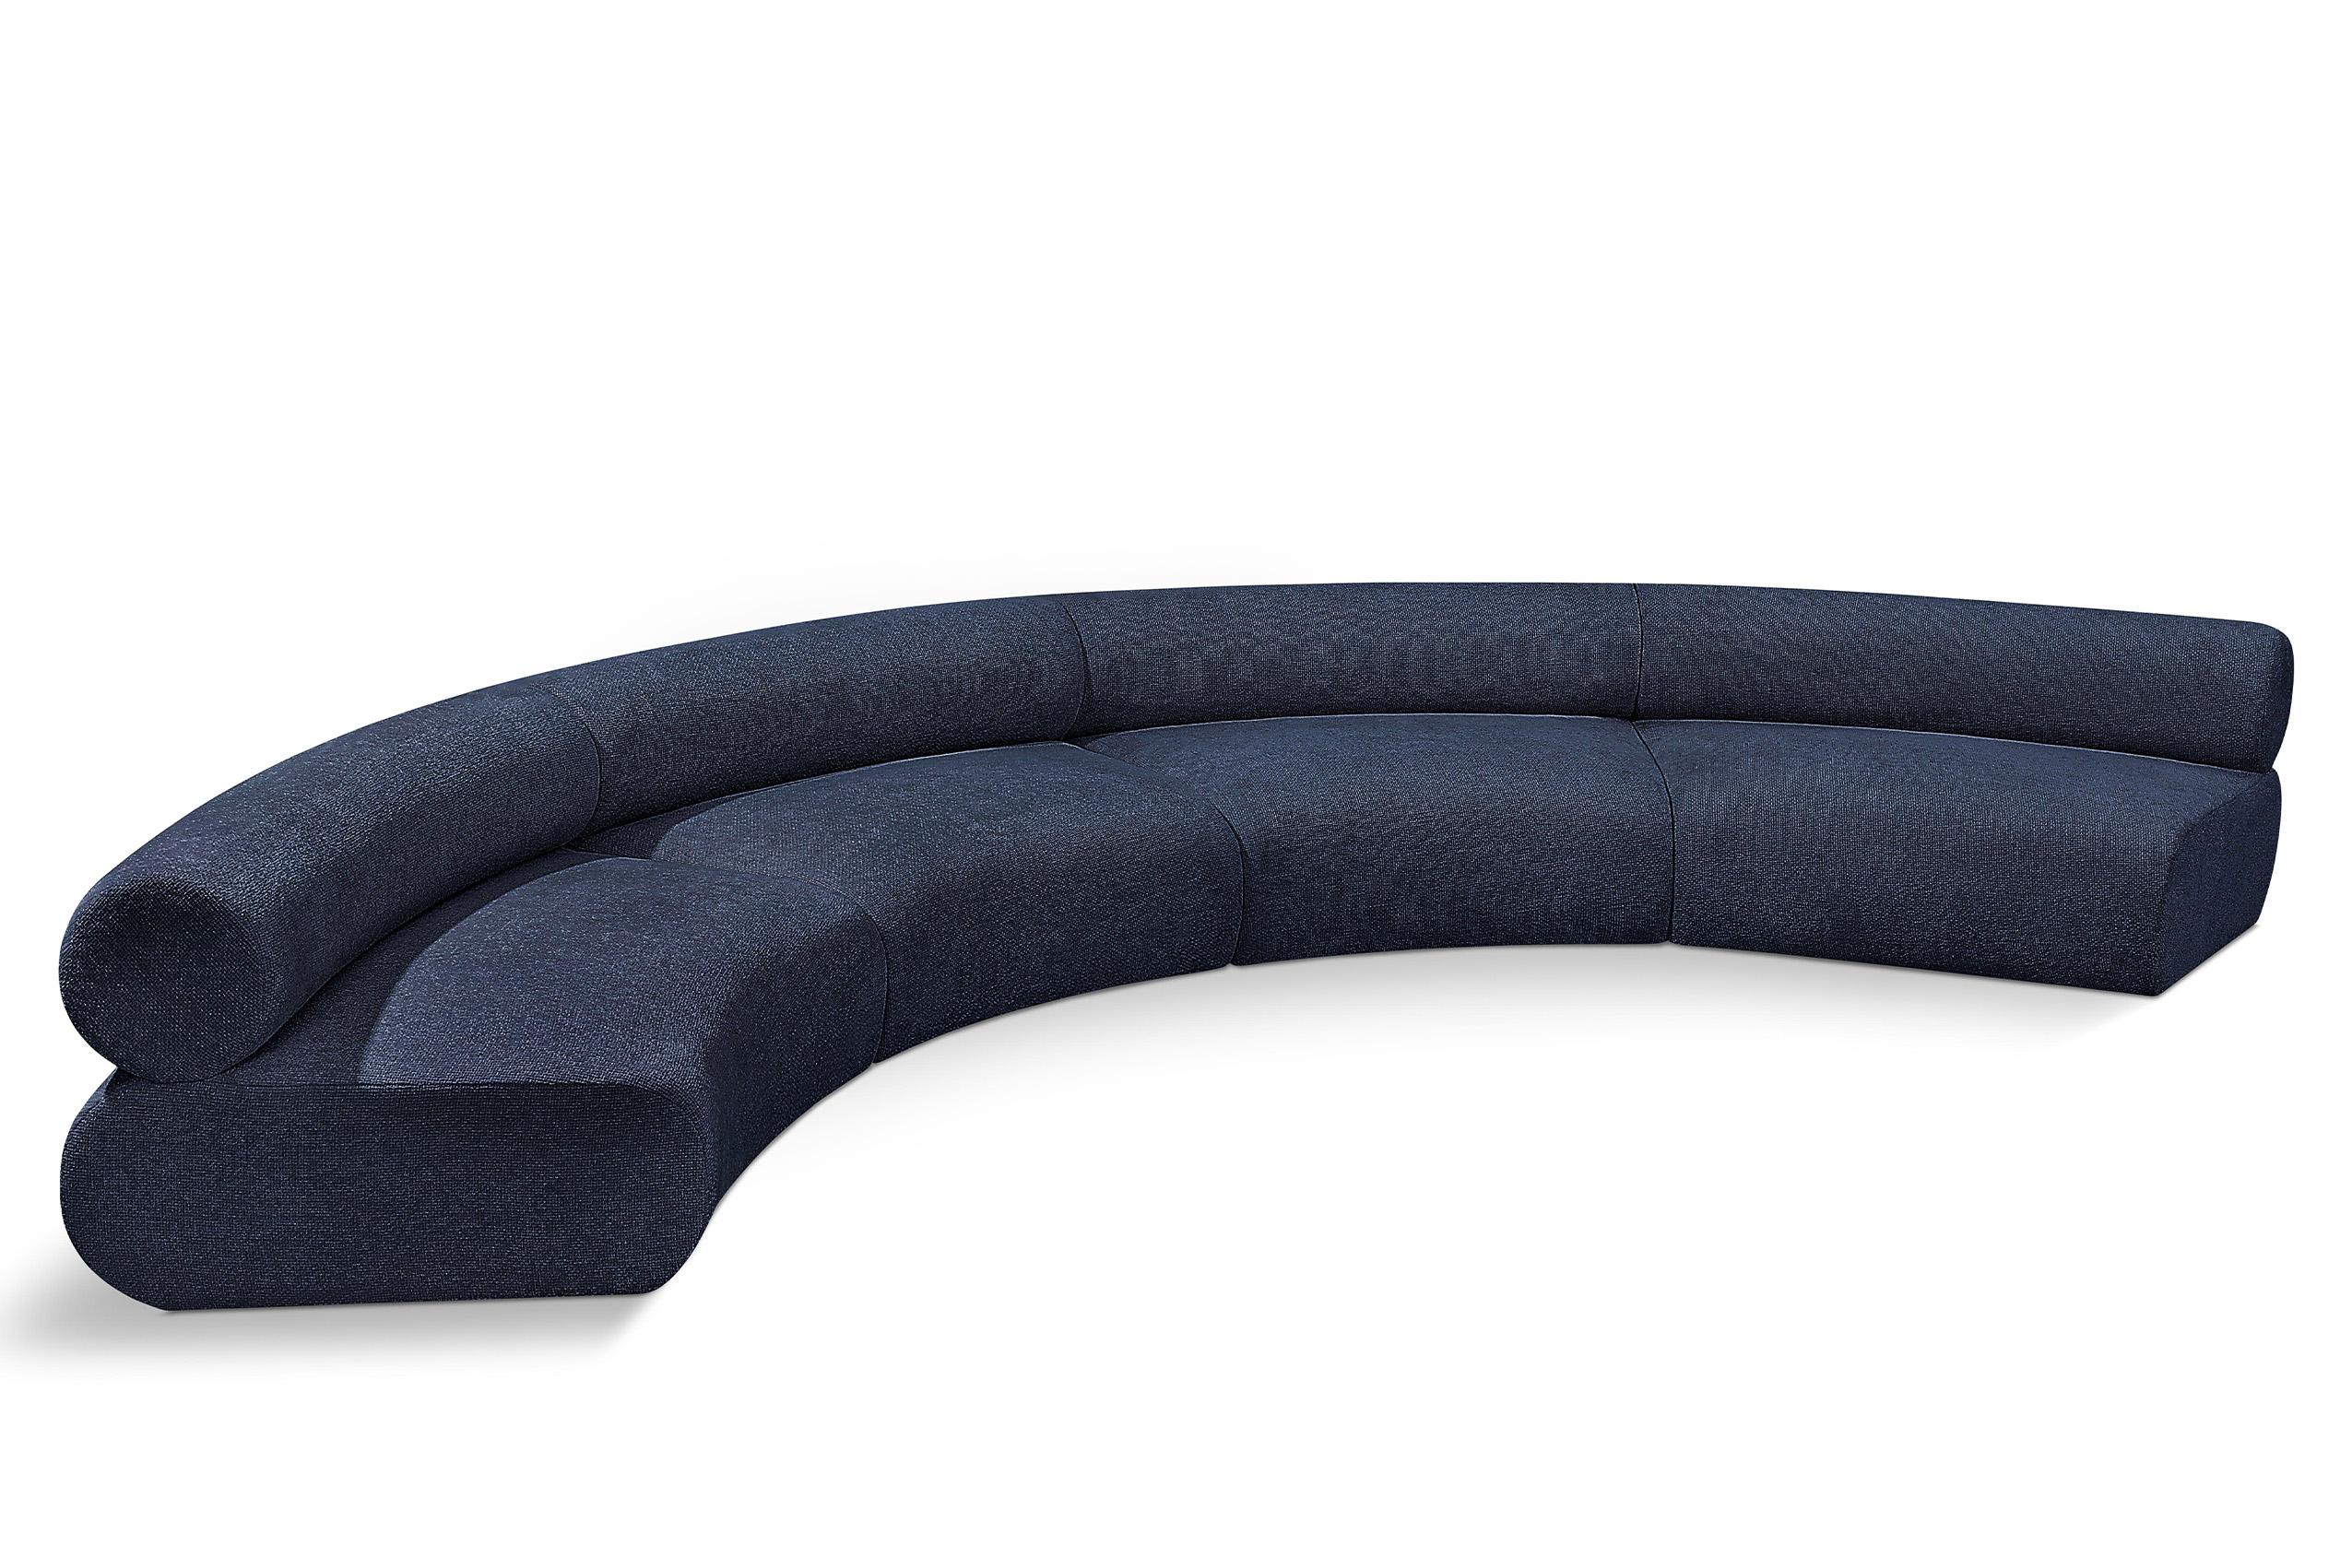 Contemporary, Modern Modular Sectional Sofa Bale 114Navy-S4A 114Navy-S4A in Navy Chenille